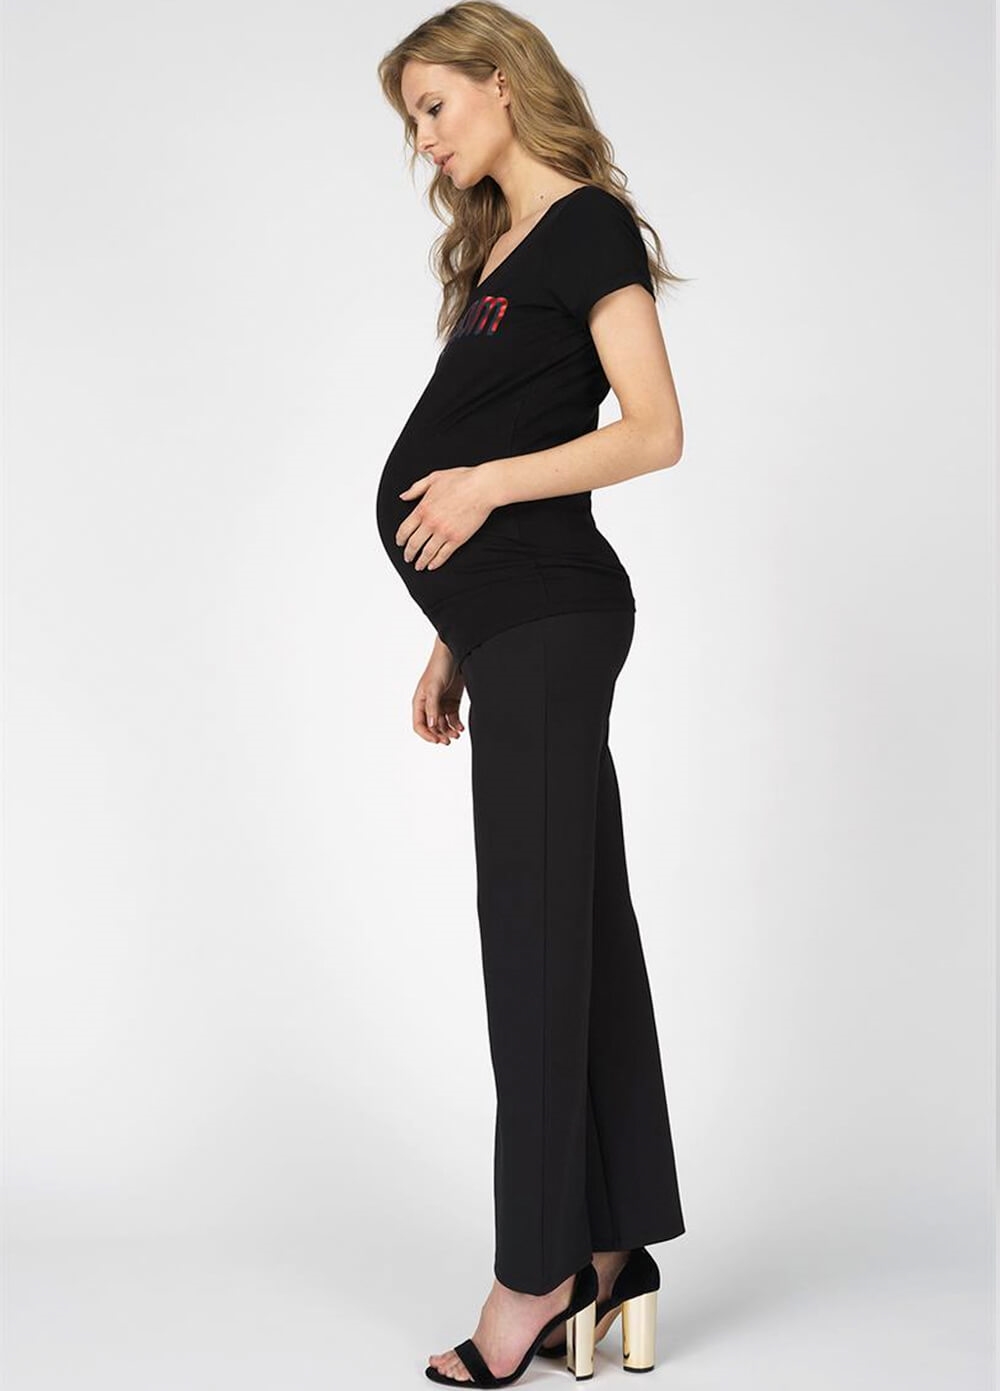 Basic Black Maternity Work Trousers by Supermom | Queen Bee